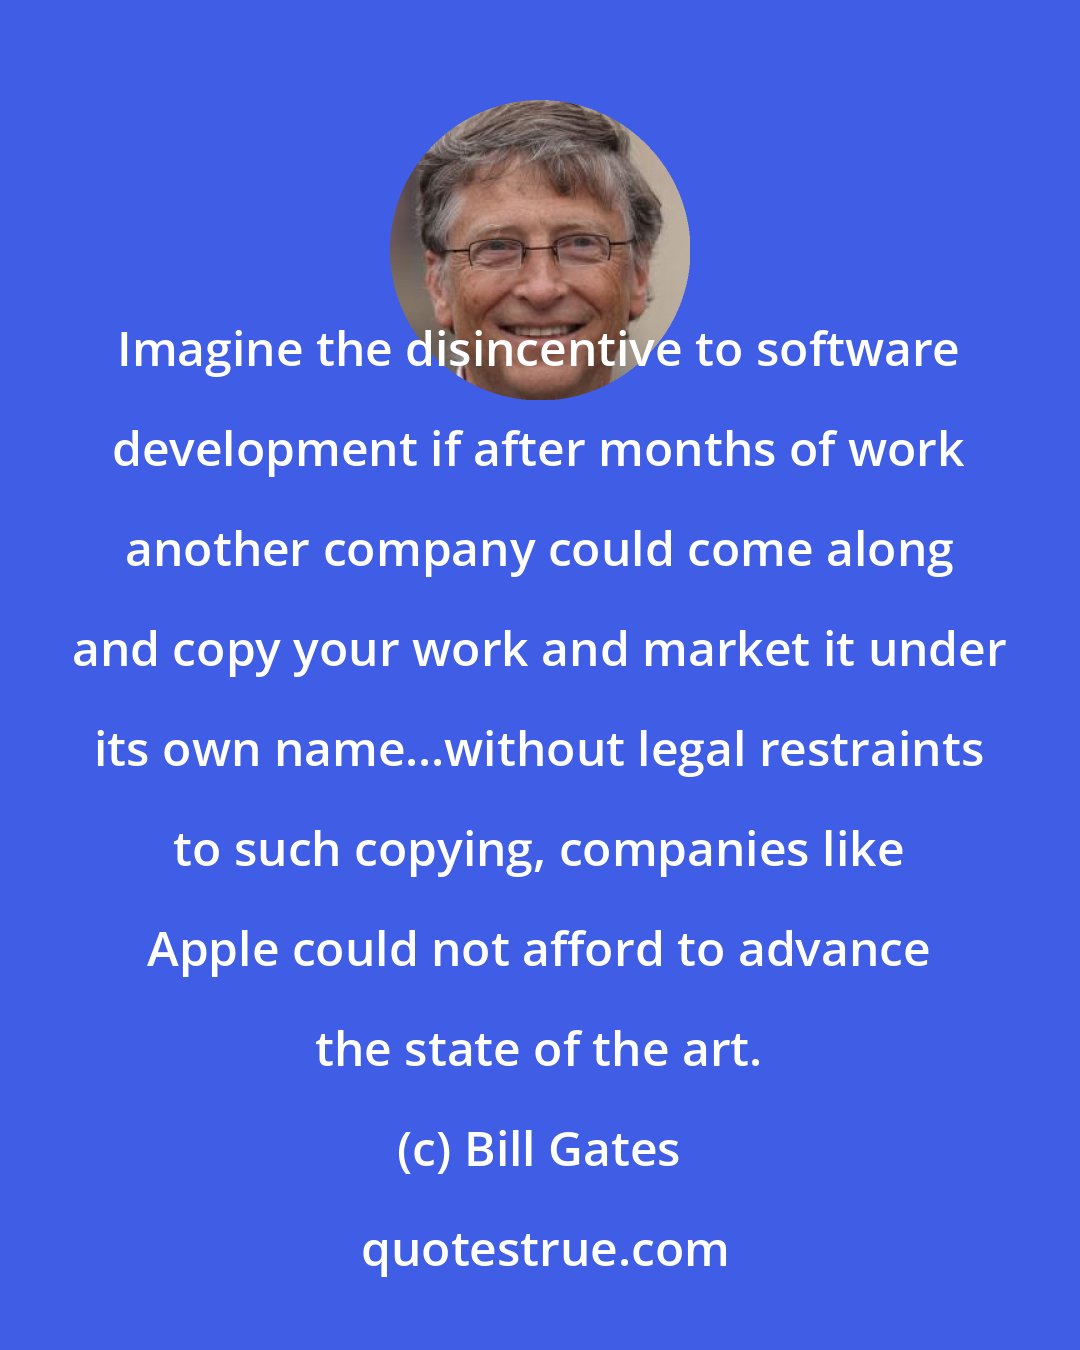 Bill Gates: Imagine the disincentive to software development if after months of work another company could come along and copy your work and market it under its own name...without legal restraints to such copying, companies like Apple could not afford to advance the state of the art.